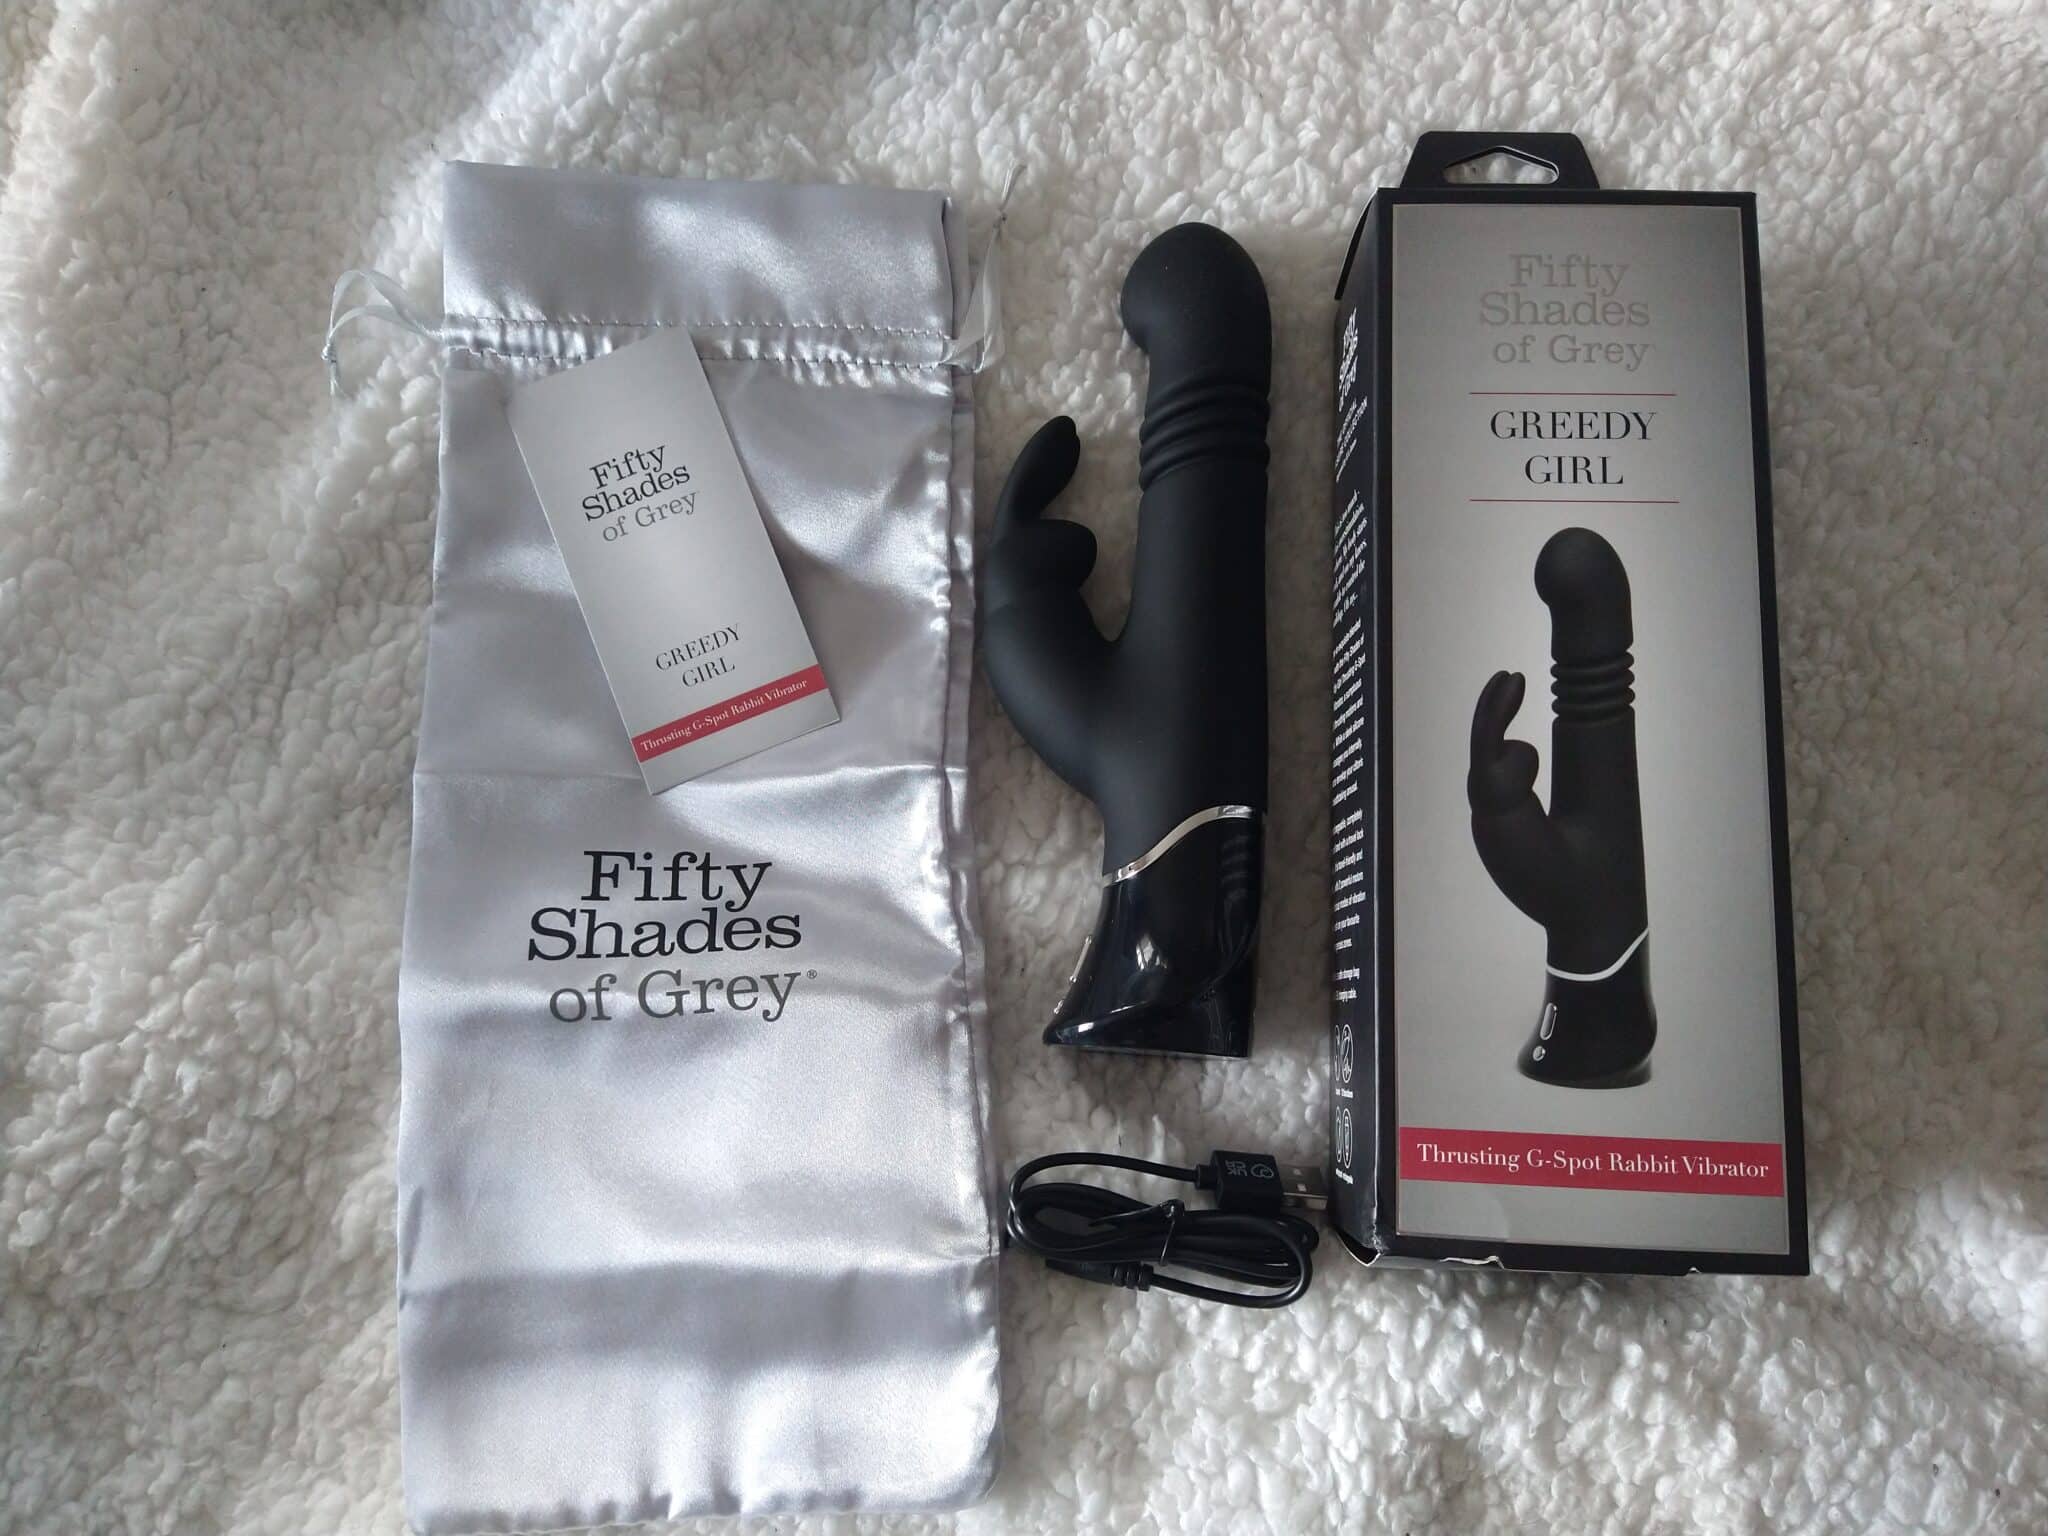 Fifty Shades of Grey Greedy Girl Thrusting Rabbit Vibrator Breaking Down the Cost of the Fifty Shades of Grey Greedy Girl Thrusting Rabbit Vibrator